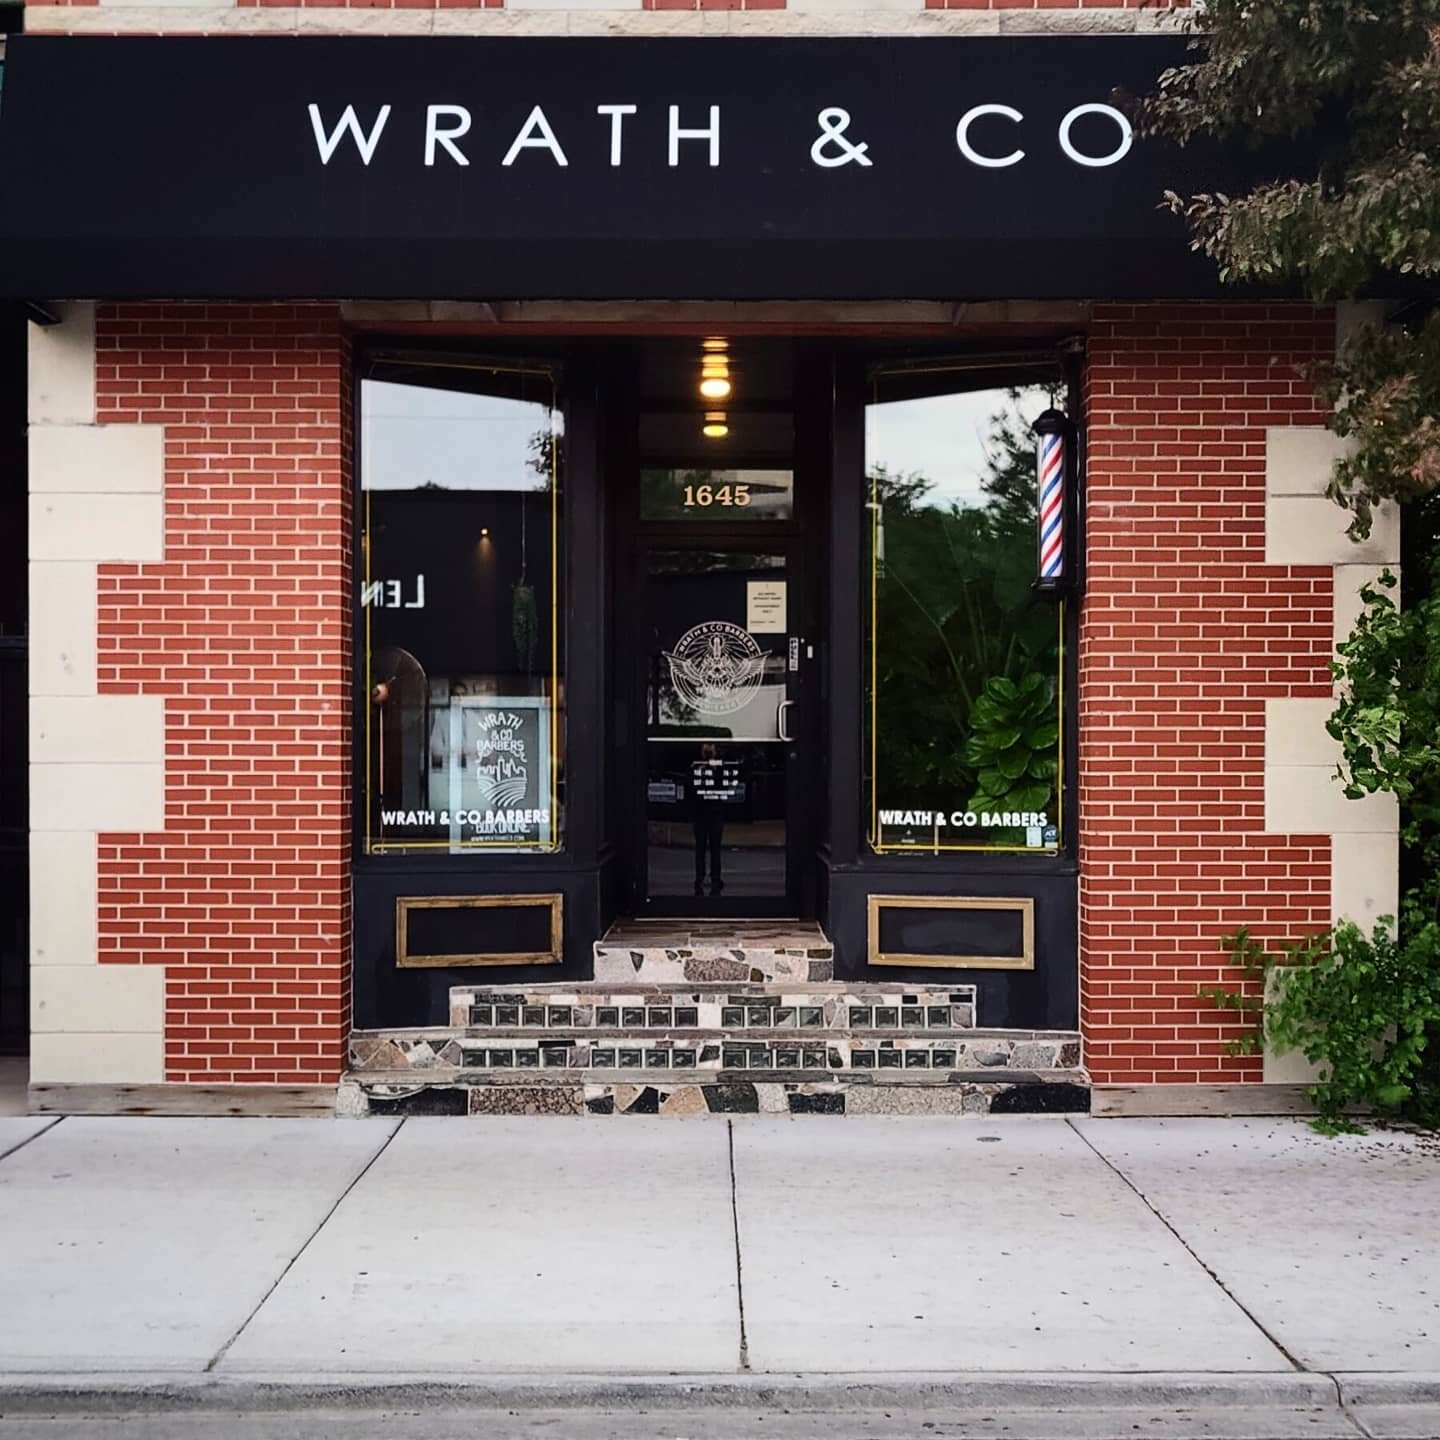 Open 7 days a week in Lincoln Park. We've only got a few spots available before the Holiday weekend. Check the website or hit the link in our bio to grab a seat. 
.
.
.
#wrathandcochicago #midwestmade #wrathandcobarbers #chicagogram #chicagobarber #c